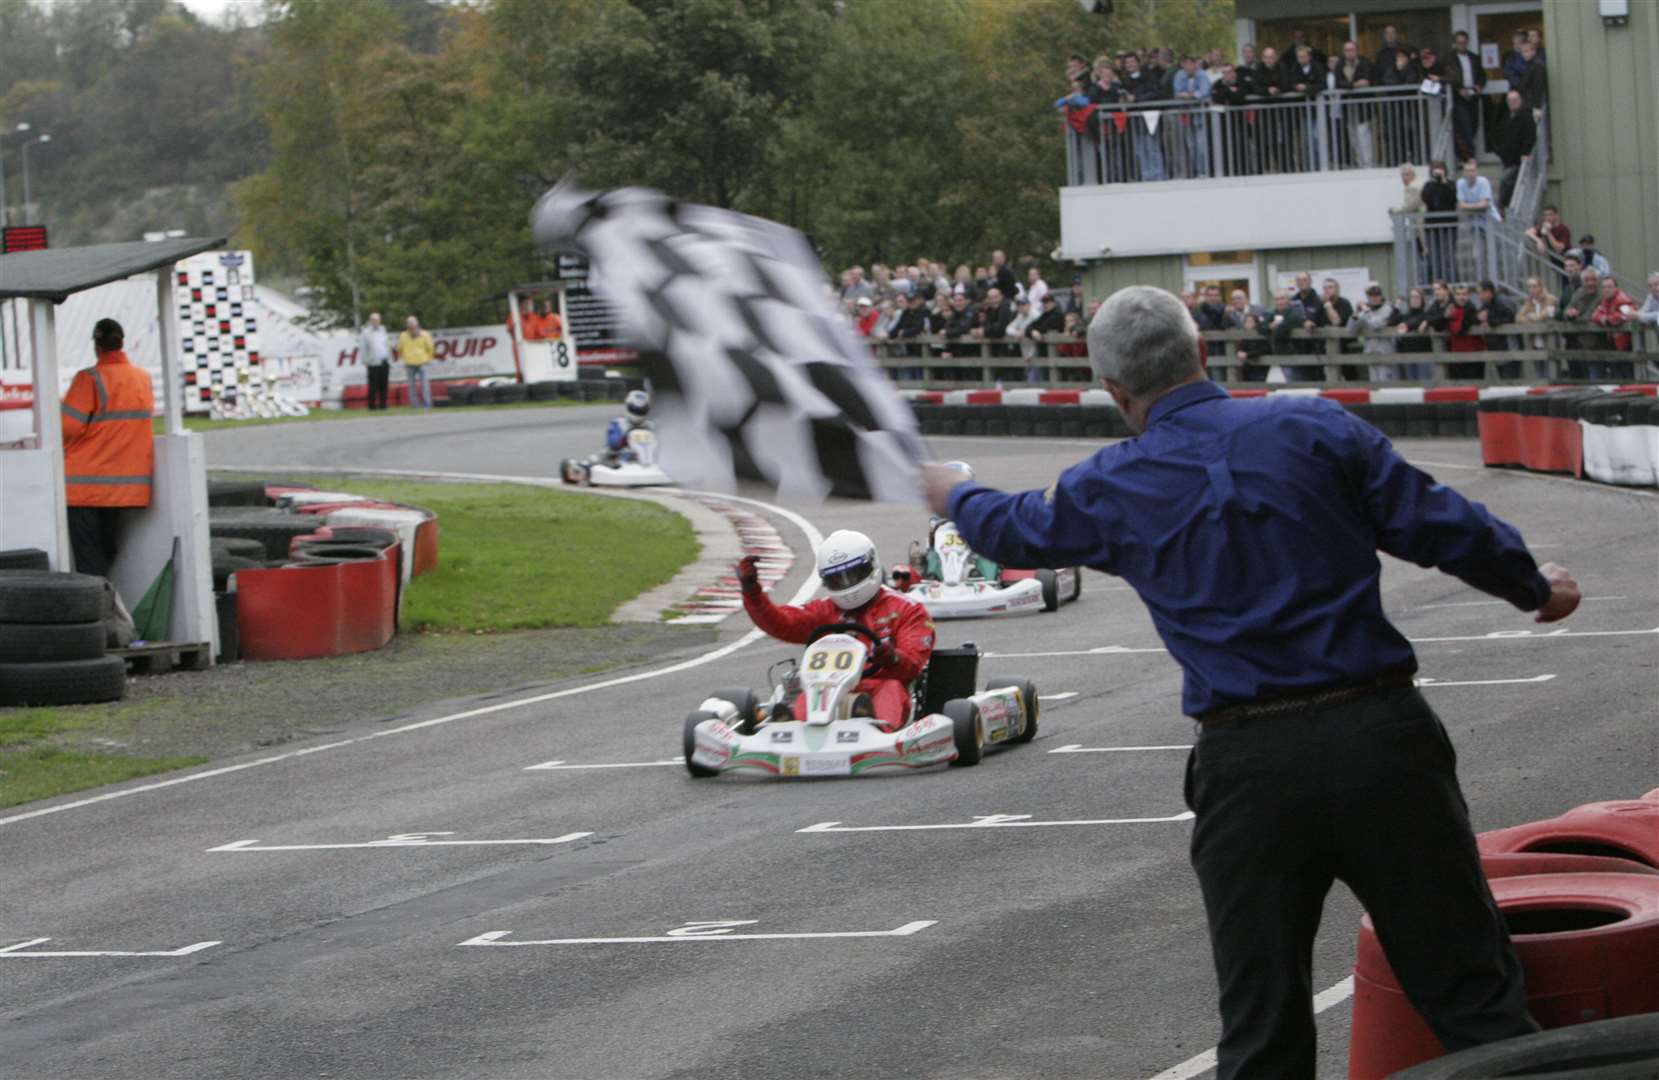 Malvern takes the Renault-backed Champion of Champions crown in 2005. He had snatched the lead with a last-lap pass on Richard Kent at Garda and held on to score what he rates as his biggest win in karting. Picture: Peter Still